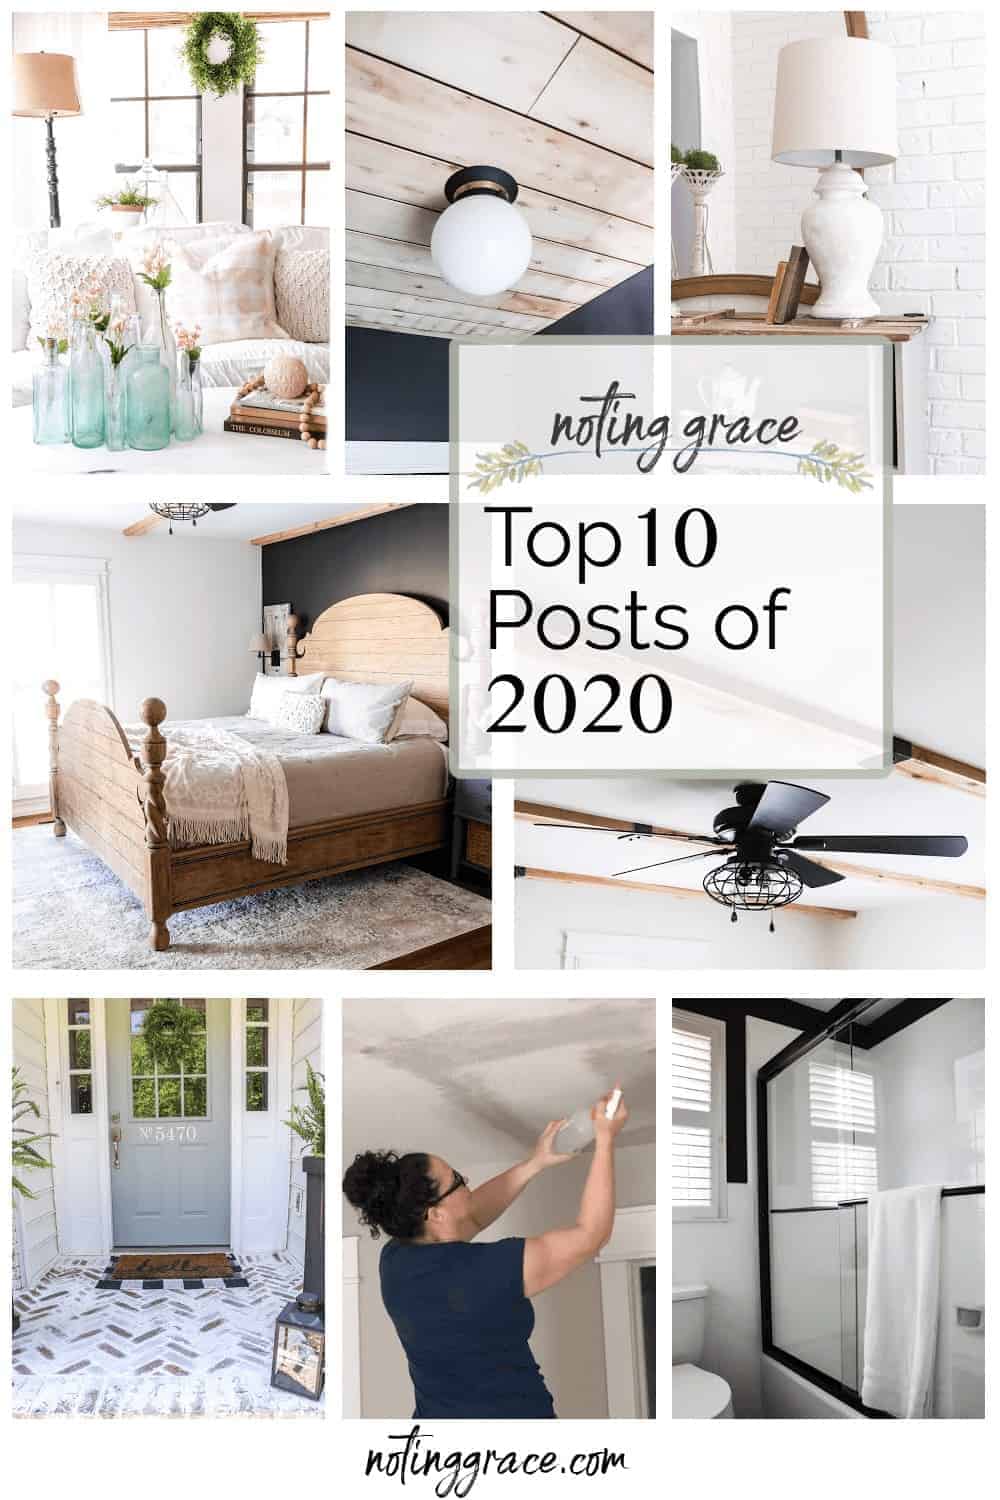 Top 10 Posts of 2020 – Check Out What We Accomplished!